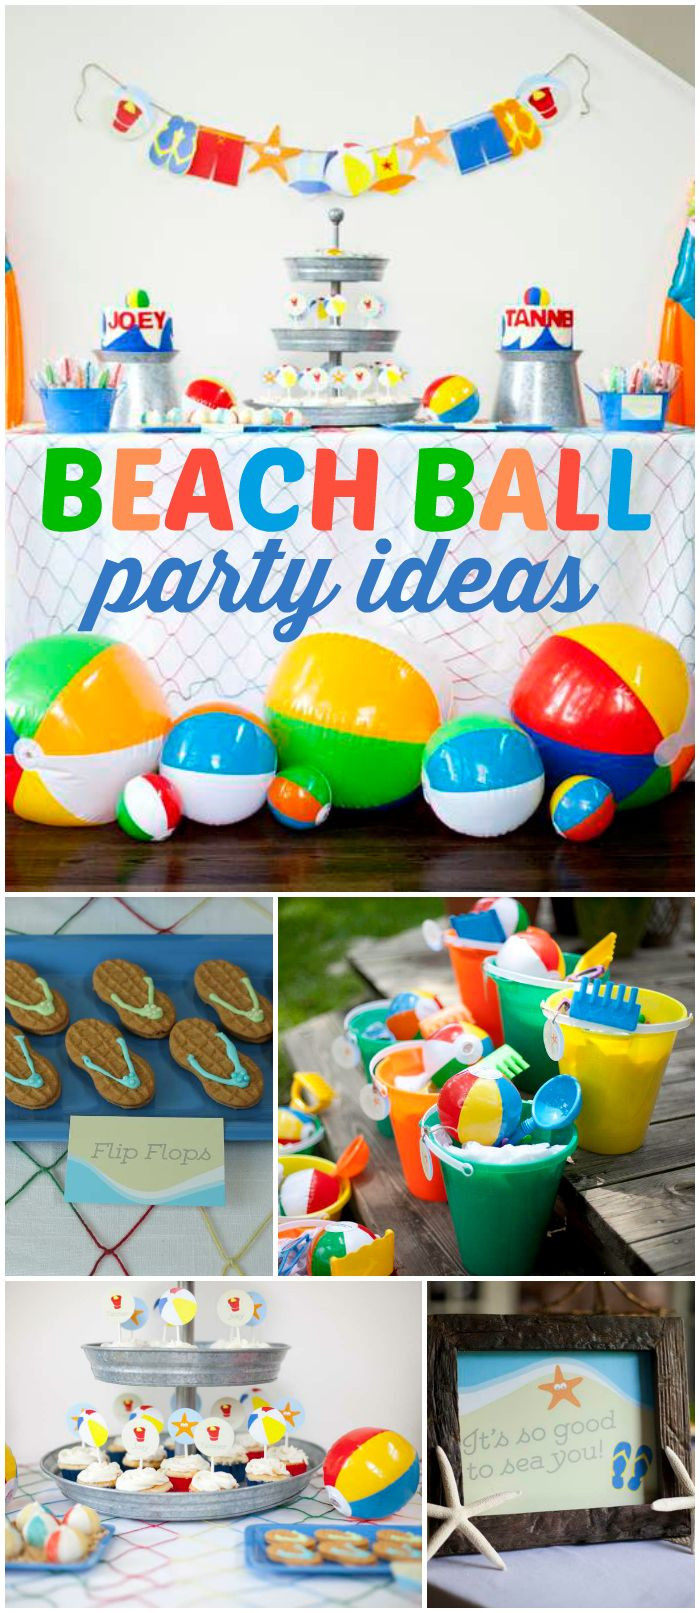 35 Of the Best Ideas for Beach Party Ideas for Adults - Home, Family ...